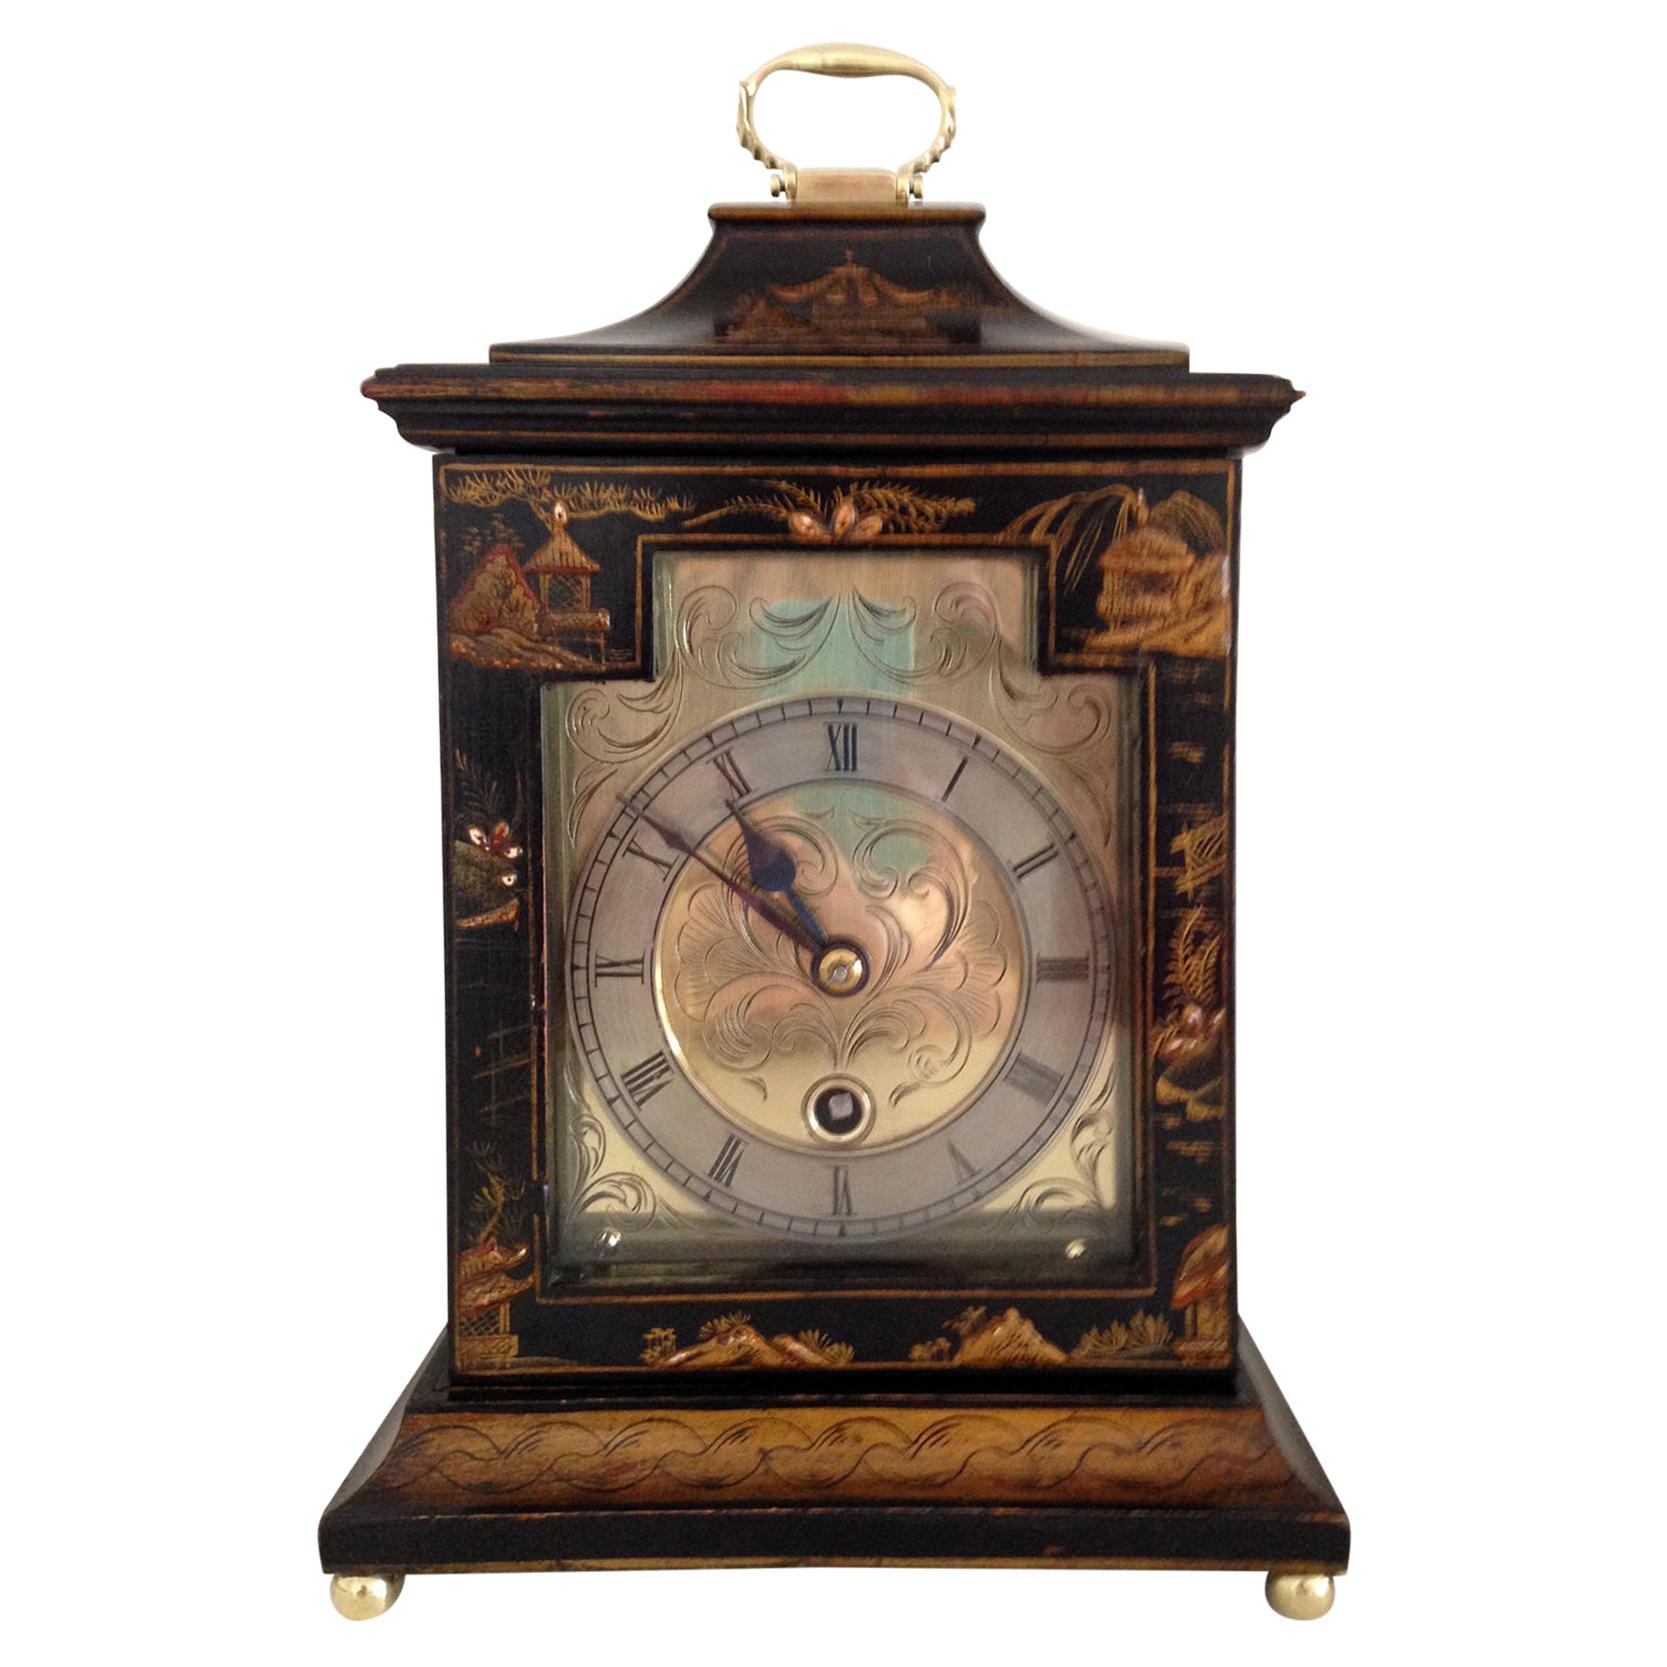 Black Cased Chinoiserie Mantel Clock by Astral of Coventry, circa 1920